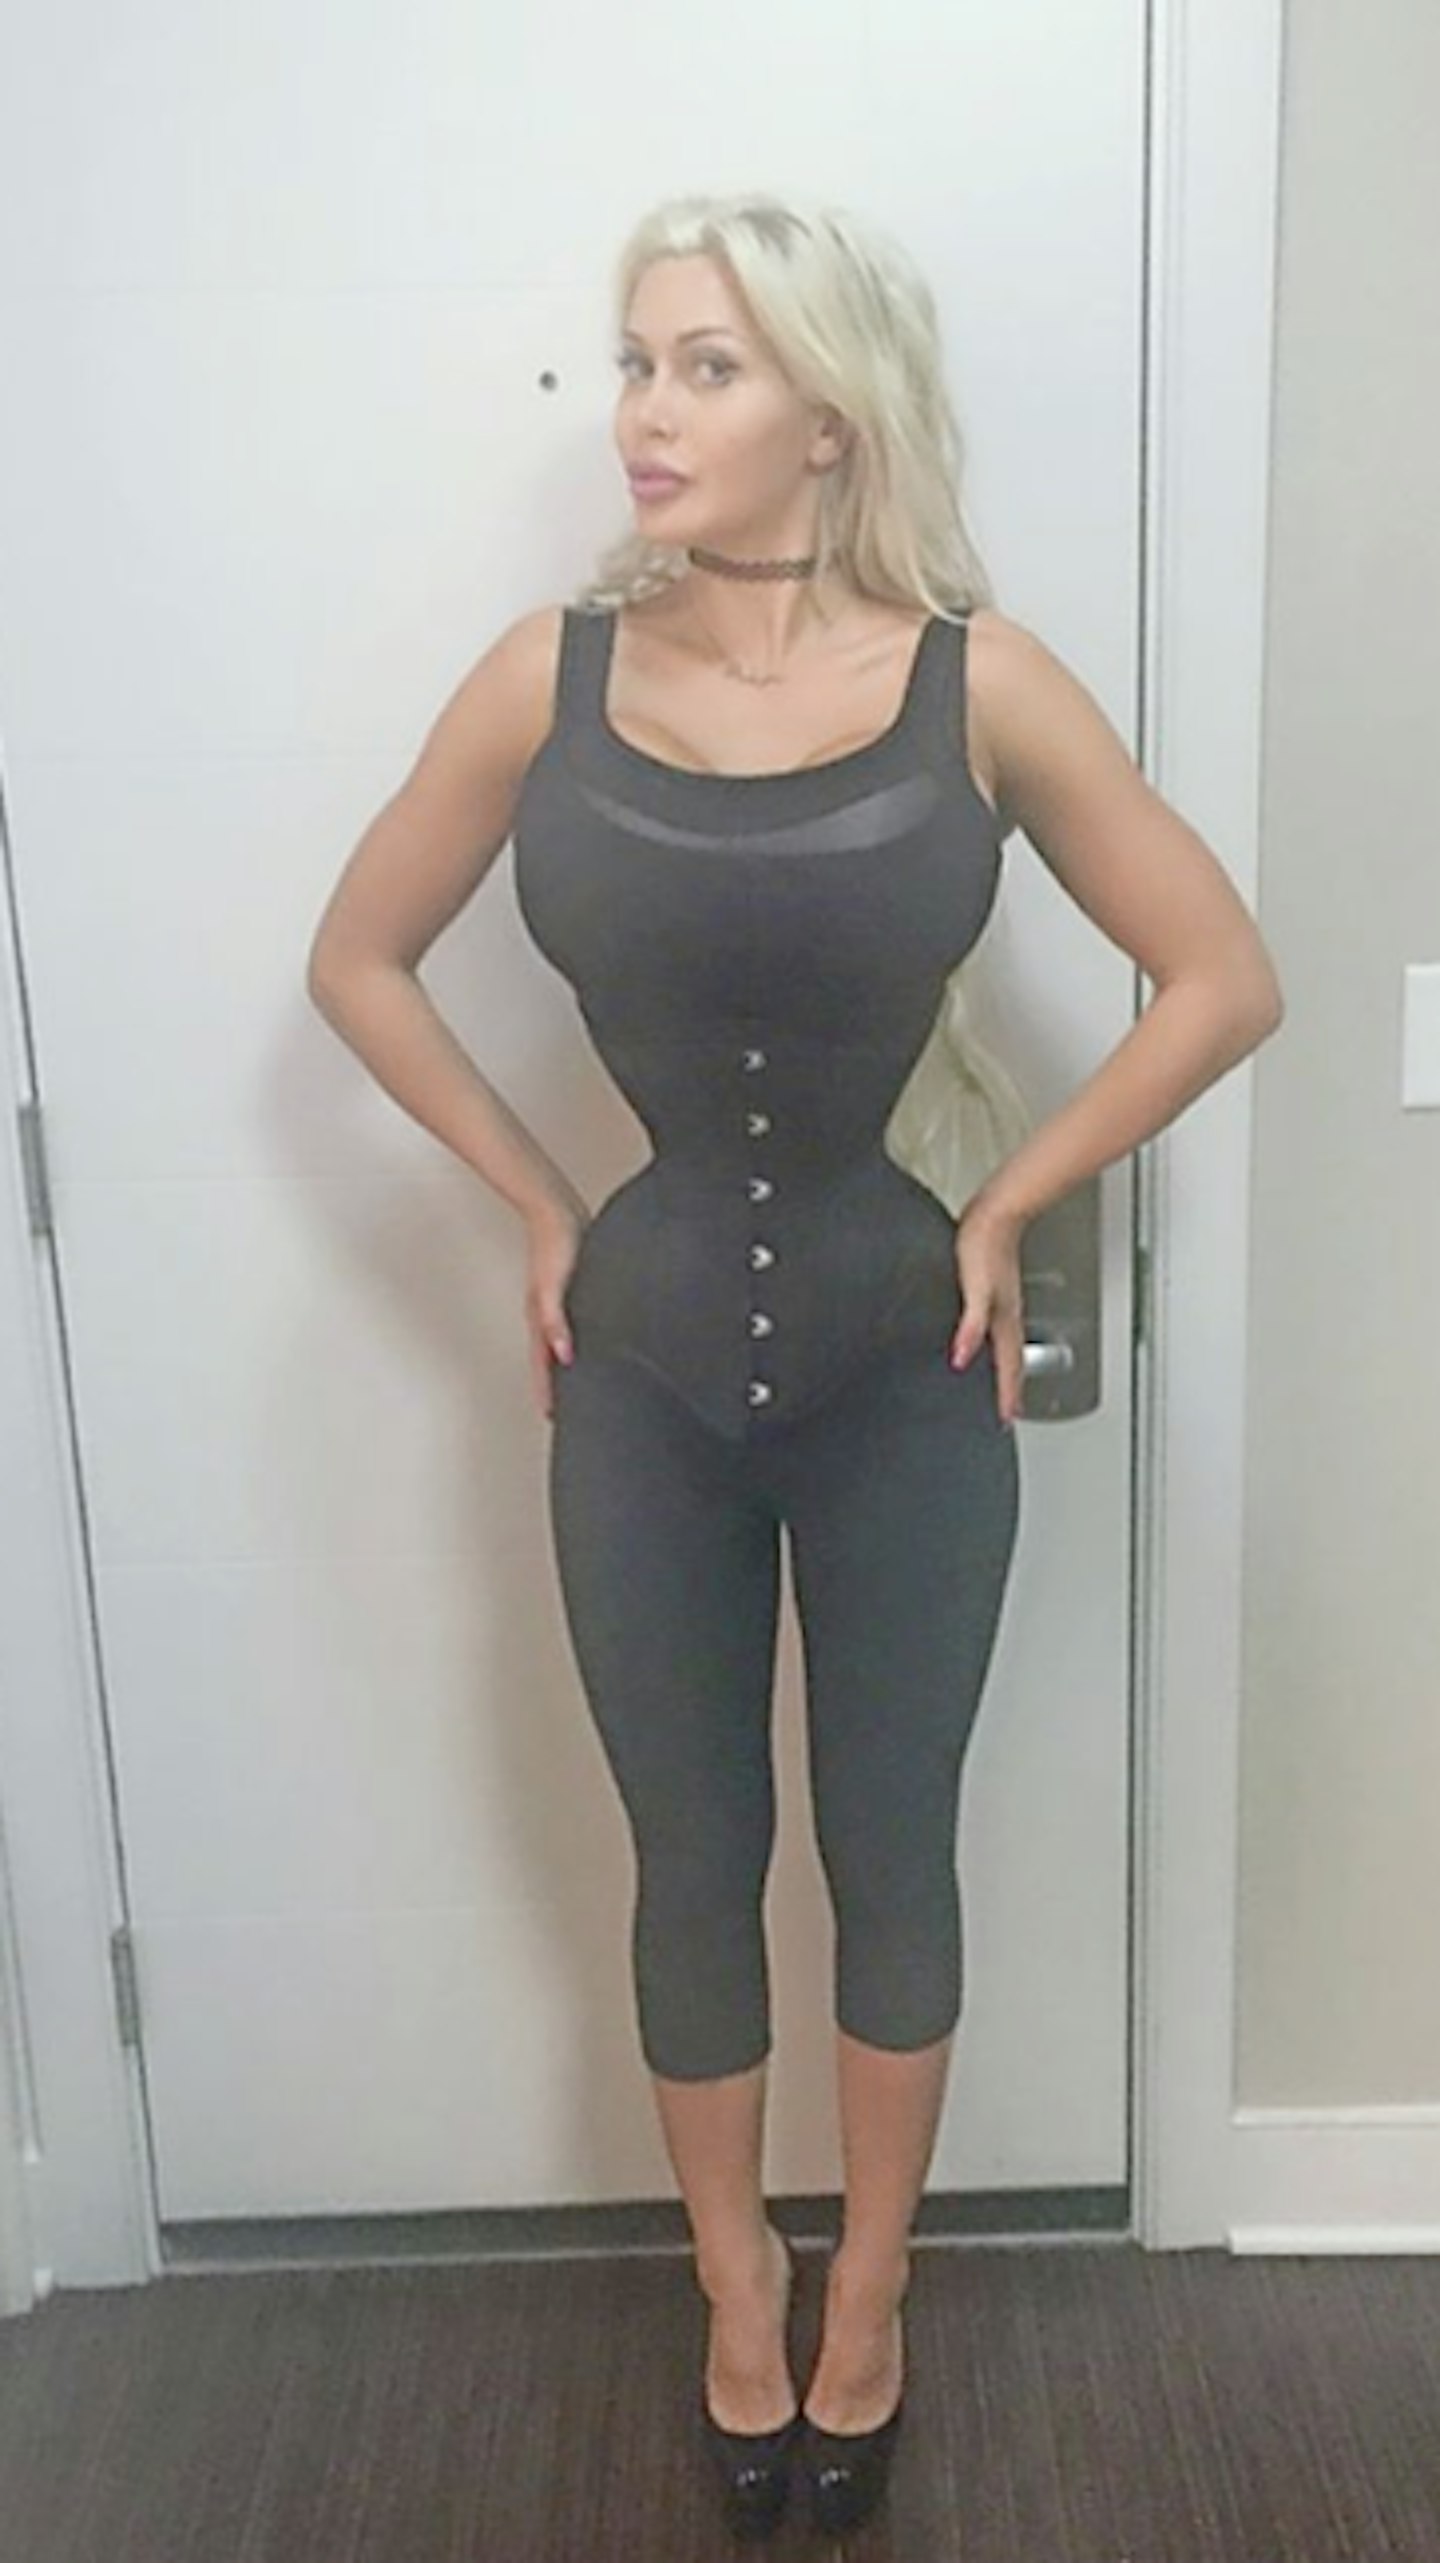 Woman removes four ribs in bid to have world's smallest waist